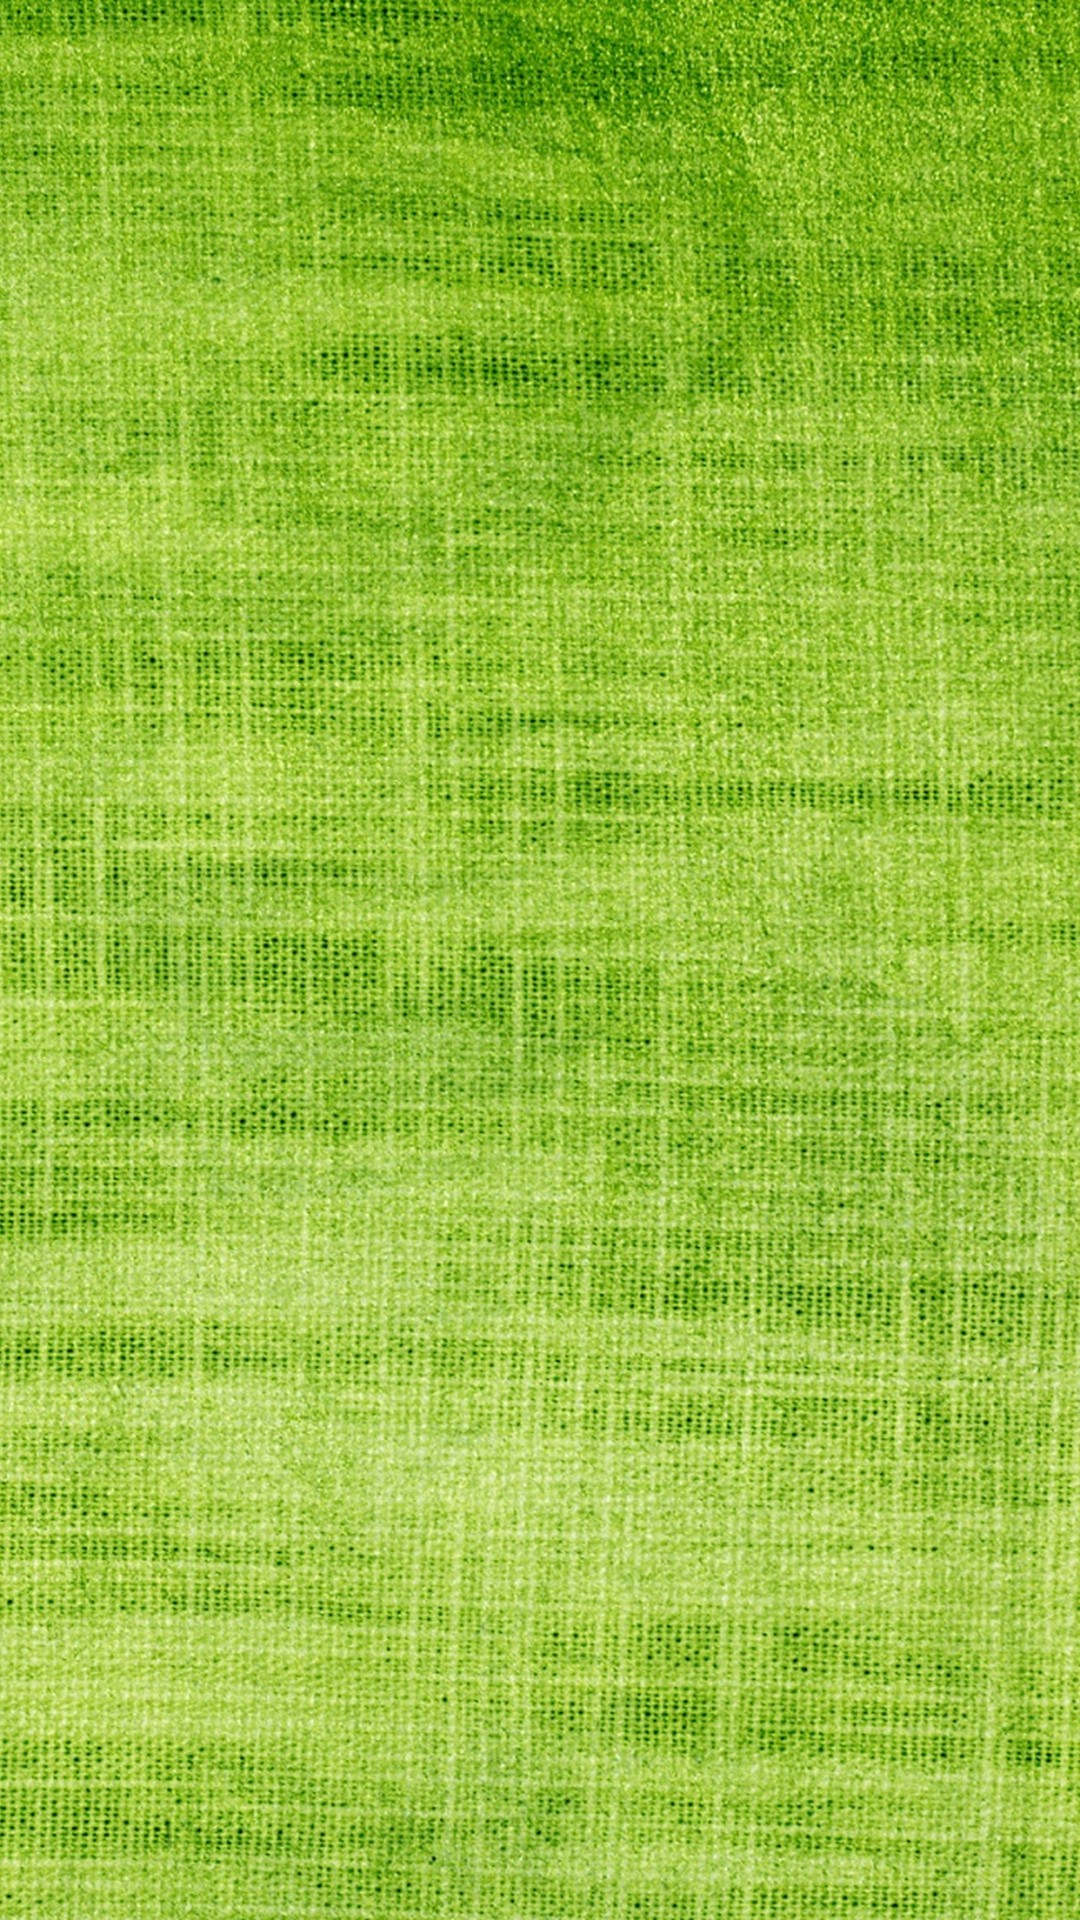 Mobile Wallpapers Lime Green with image resolution 1080x1920 pixel. You can make this wallpaper for your iPhone 5, 6, 7, 8, X backgrounds, Mobile Screensaver, or iPad Lock Screen